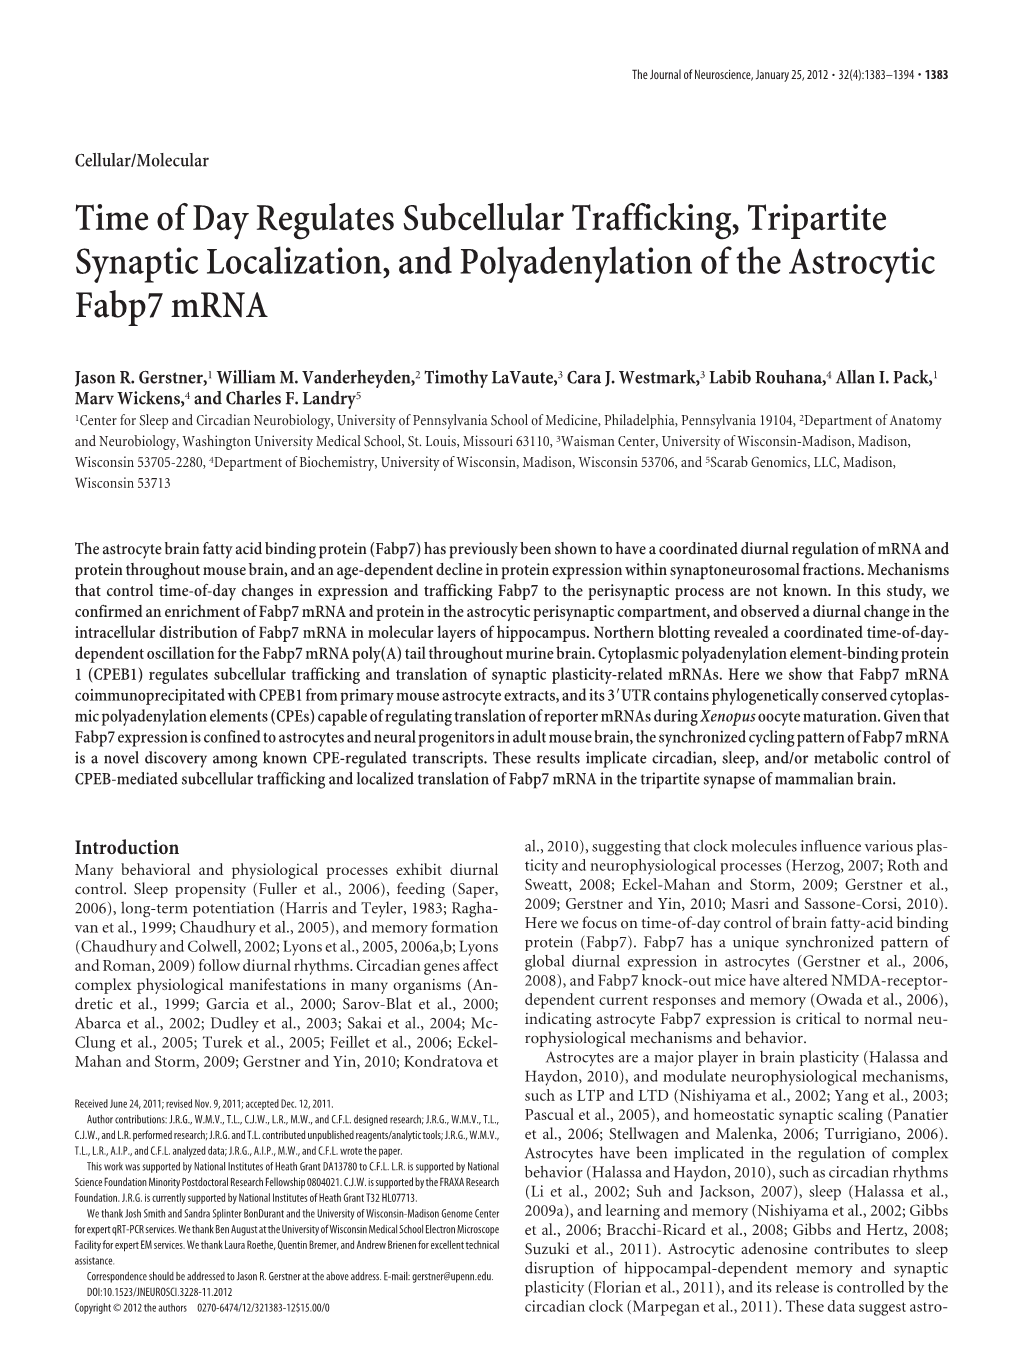 Time of Day Regulates Subcellular Trafficking, Tripartite Synaptic Localization, and Polyadenylation of the Astrocytic Fabp7 Mrna